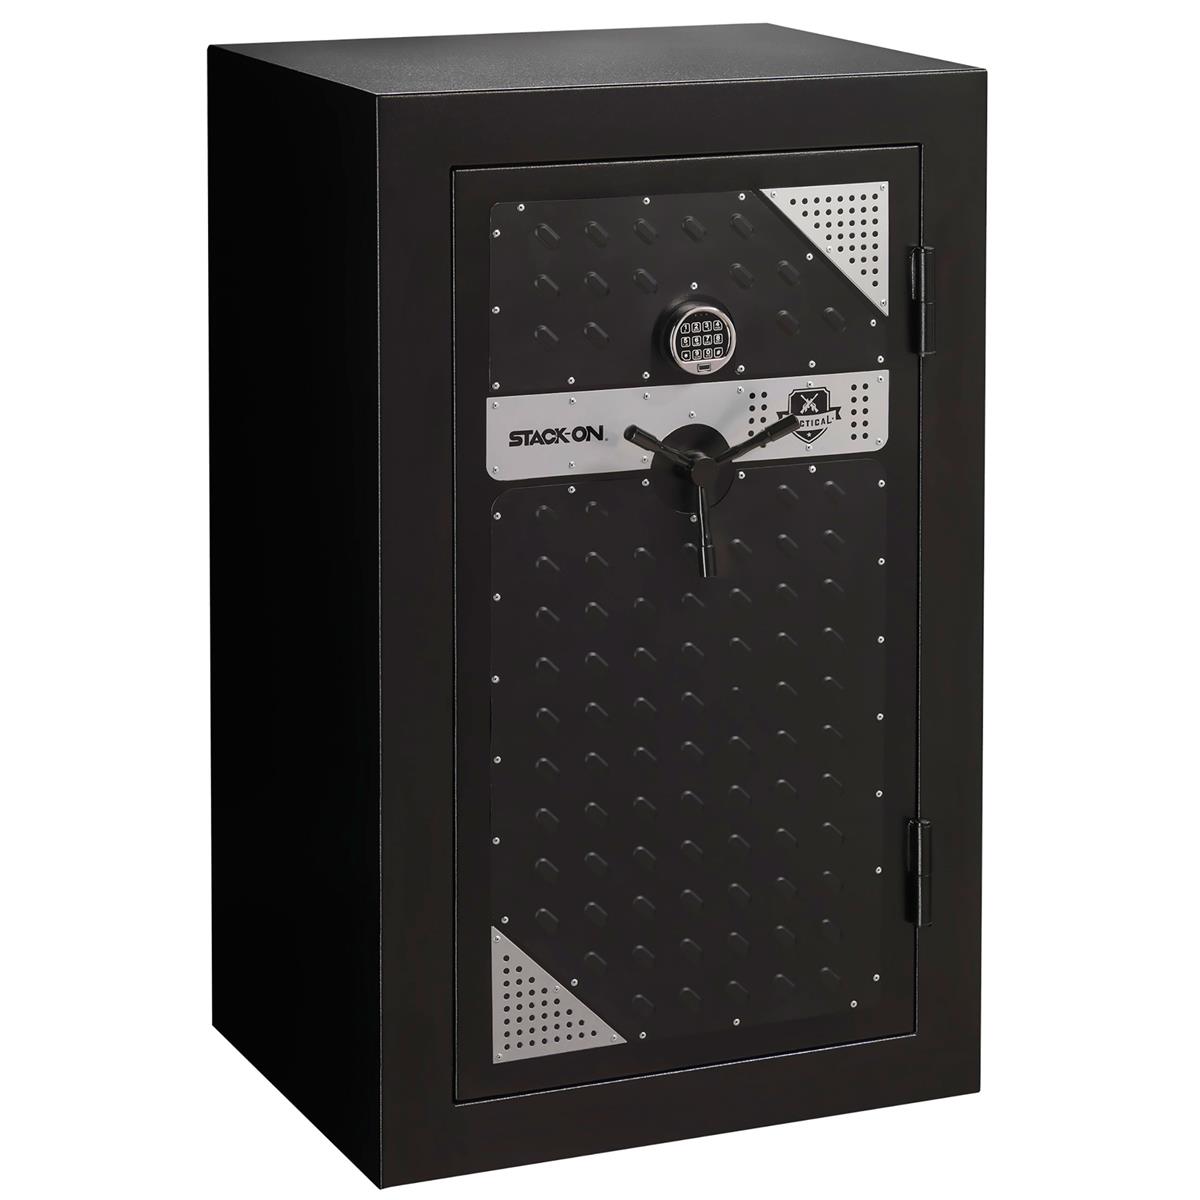 Stack-On Tactical Fire Resistant Security 20 Gun Safe - Black - Black -  TS-20-MB-E-S